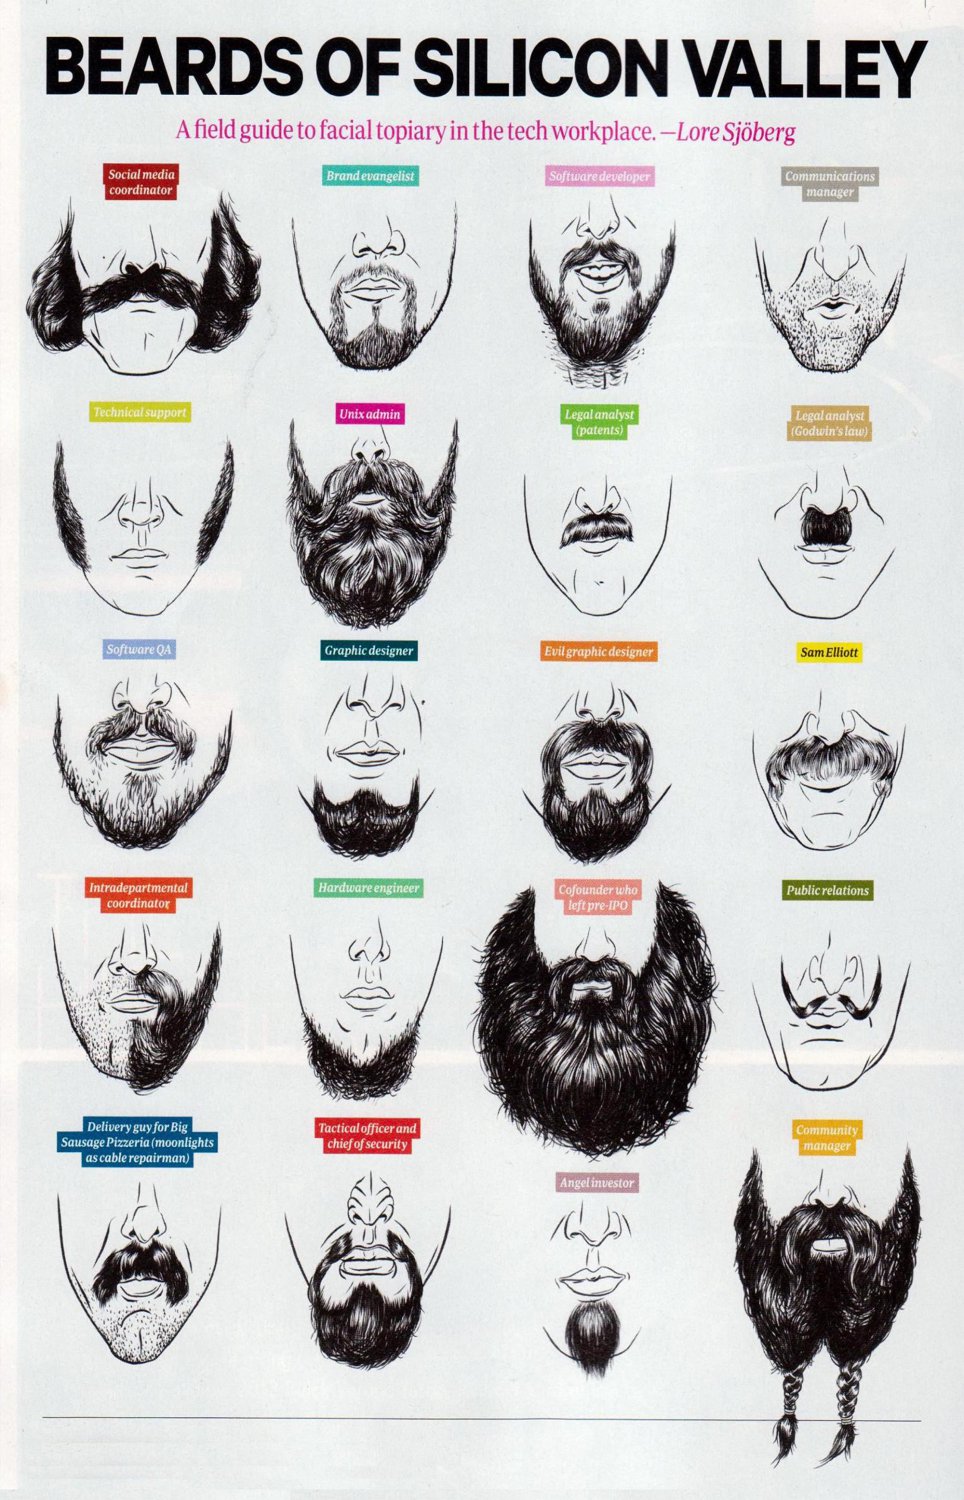 Beards of Silicon Valley Infographic Chart 13"x19" (32cm/49cm) Polyester Fabric Poster